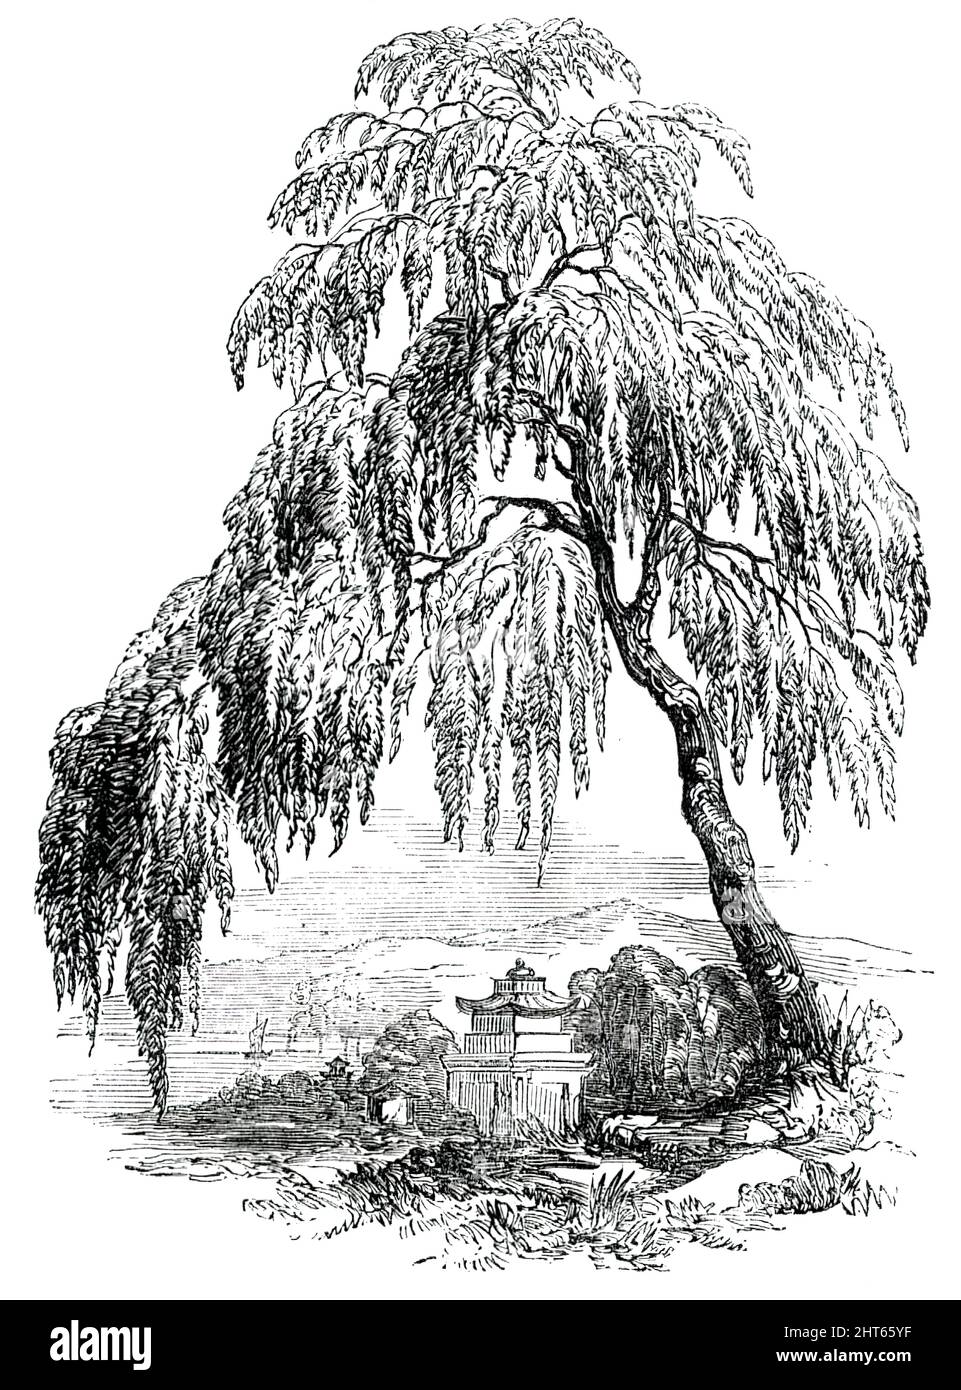 The Funebral Cypress, 1850. 'The traveller who appears originally to have noticed the Funebral Cypress...was Sir George Staunton, when exploring China in the embassy of Lord Macartney...Subsequently, however, Mr. Fortune met with it near the celebrated tea country of Whey Chow; and through the interest of that gentleman, Messrs. Standish and Noble, of the Bagshot Nurseries...have been enabled to import both seeds and young plants. Mr. Fortune describes this Weeping Cypress as...a noble looking fir-tree, about sixty feet in height, having...pendulous branches like the weeping willow...It will b Stock Photo